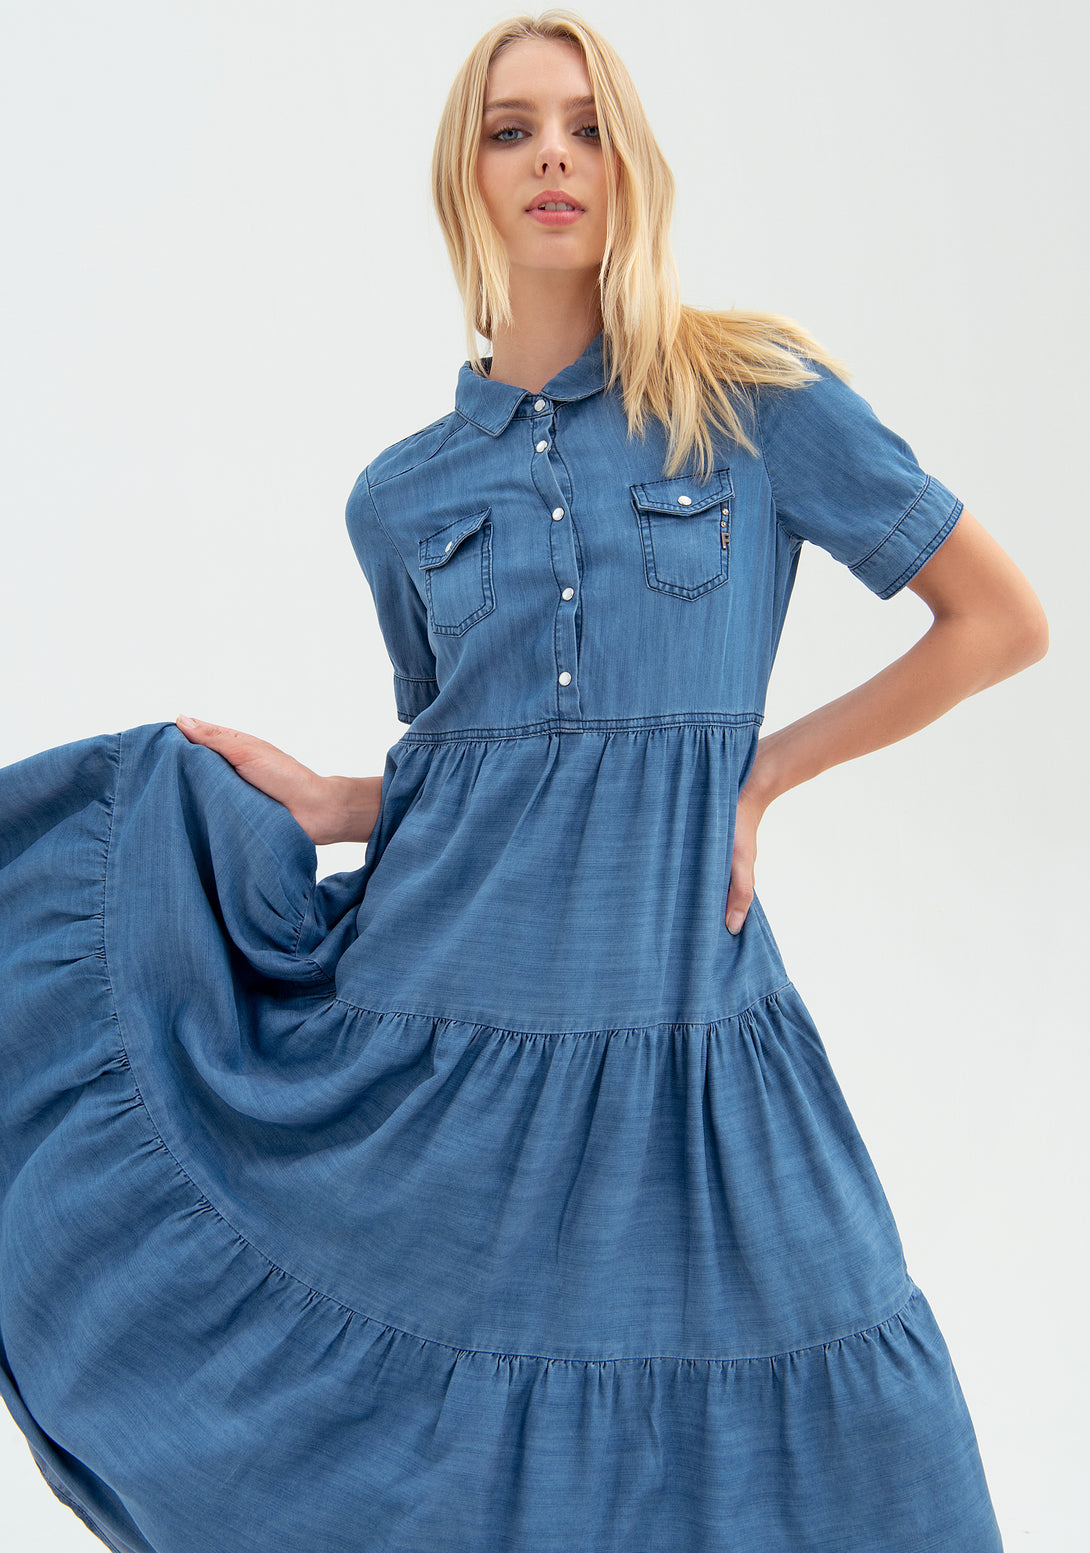 Dress wide fit made in chambray